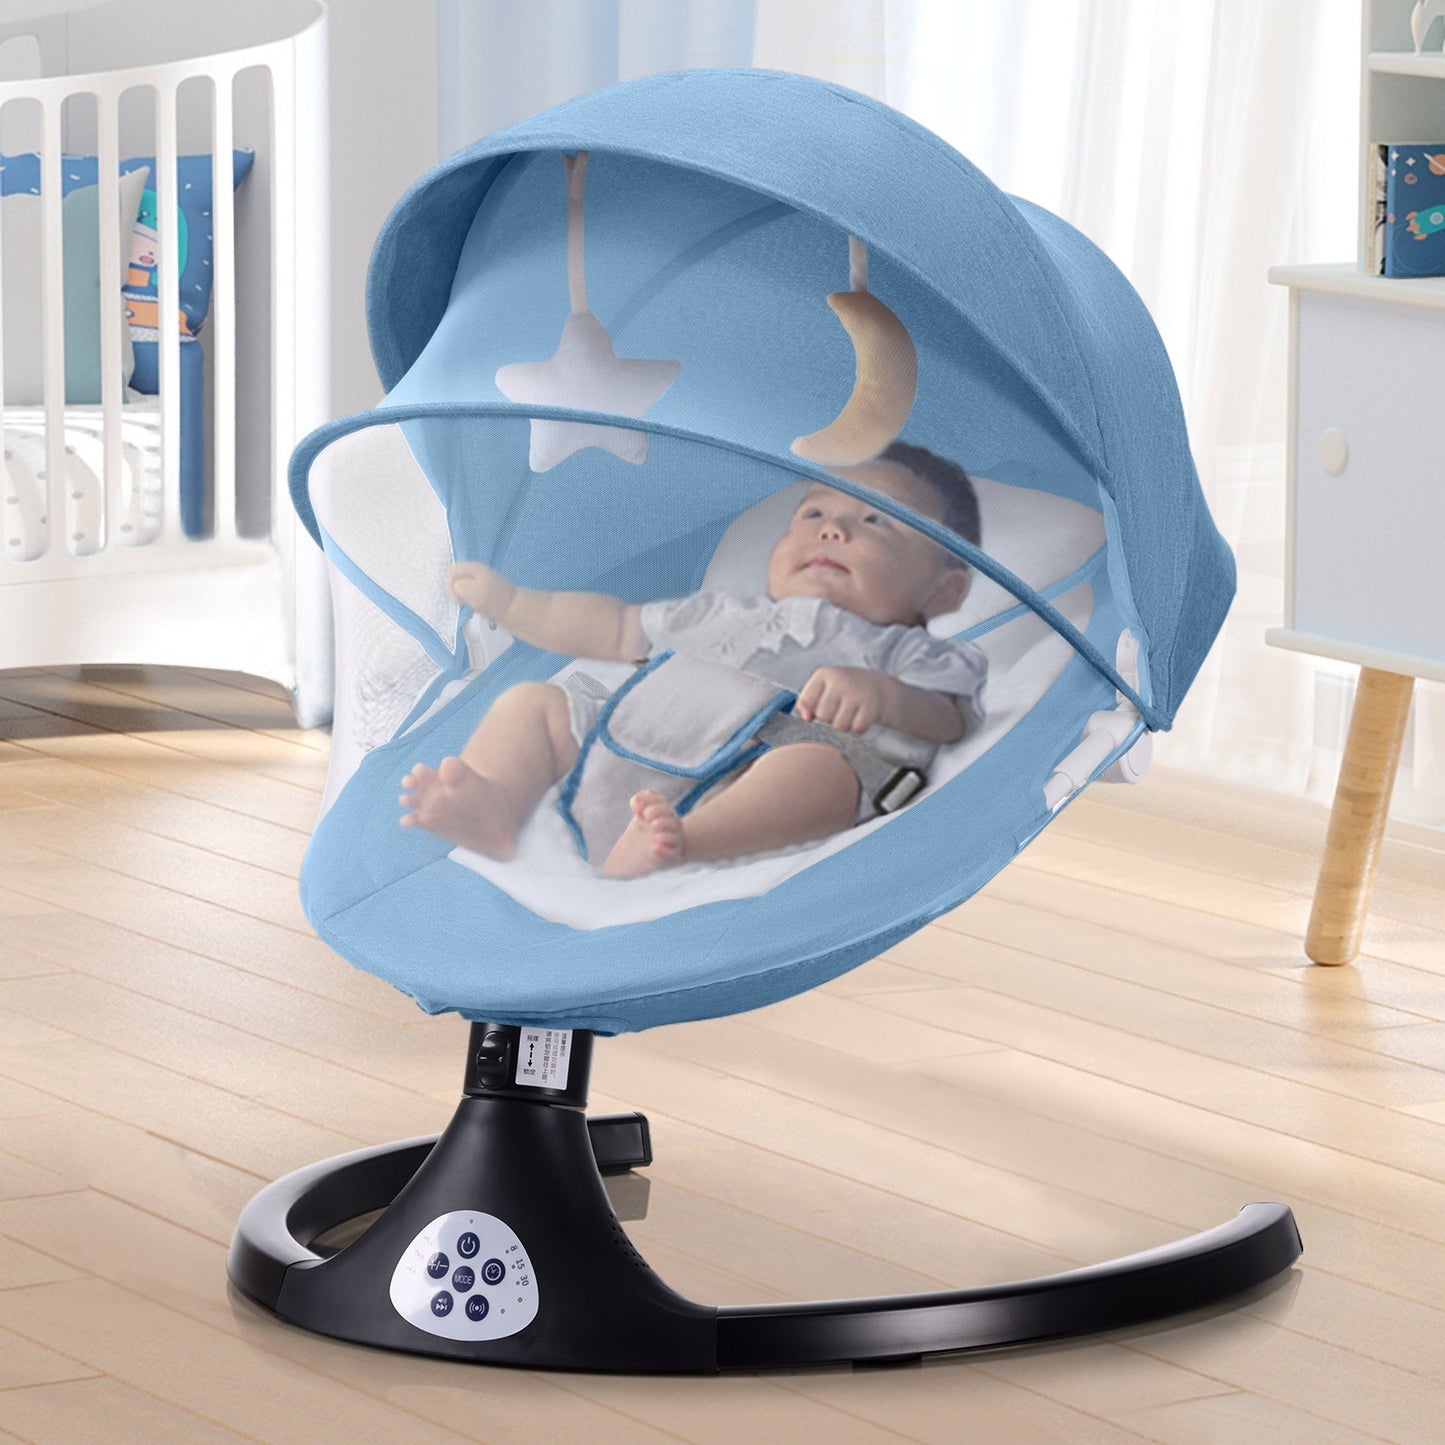 Baby Swing for Infants, 5 Speed Electric Bluetooth Baby Rocker for Newborn, 3 Timer Settings & 10 Pre-Set Lullabies, Portable Baby Rocker with Tray and Remote Control for 5-26 lbs, 0-12 Months,Blue